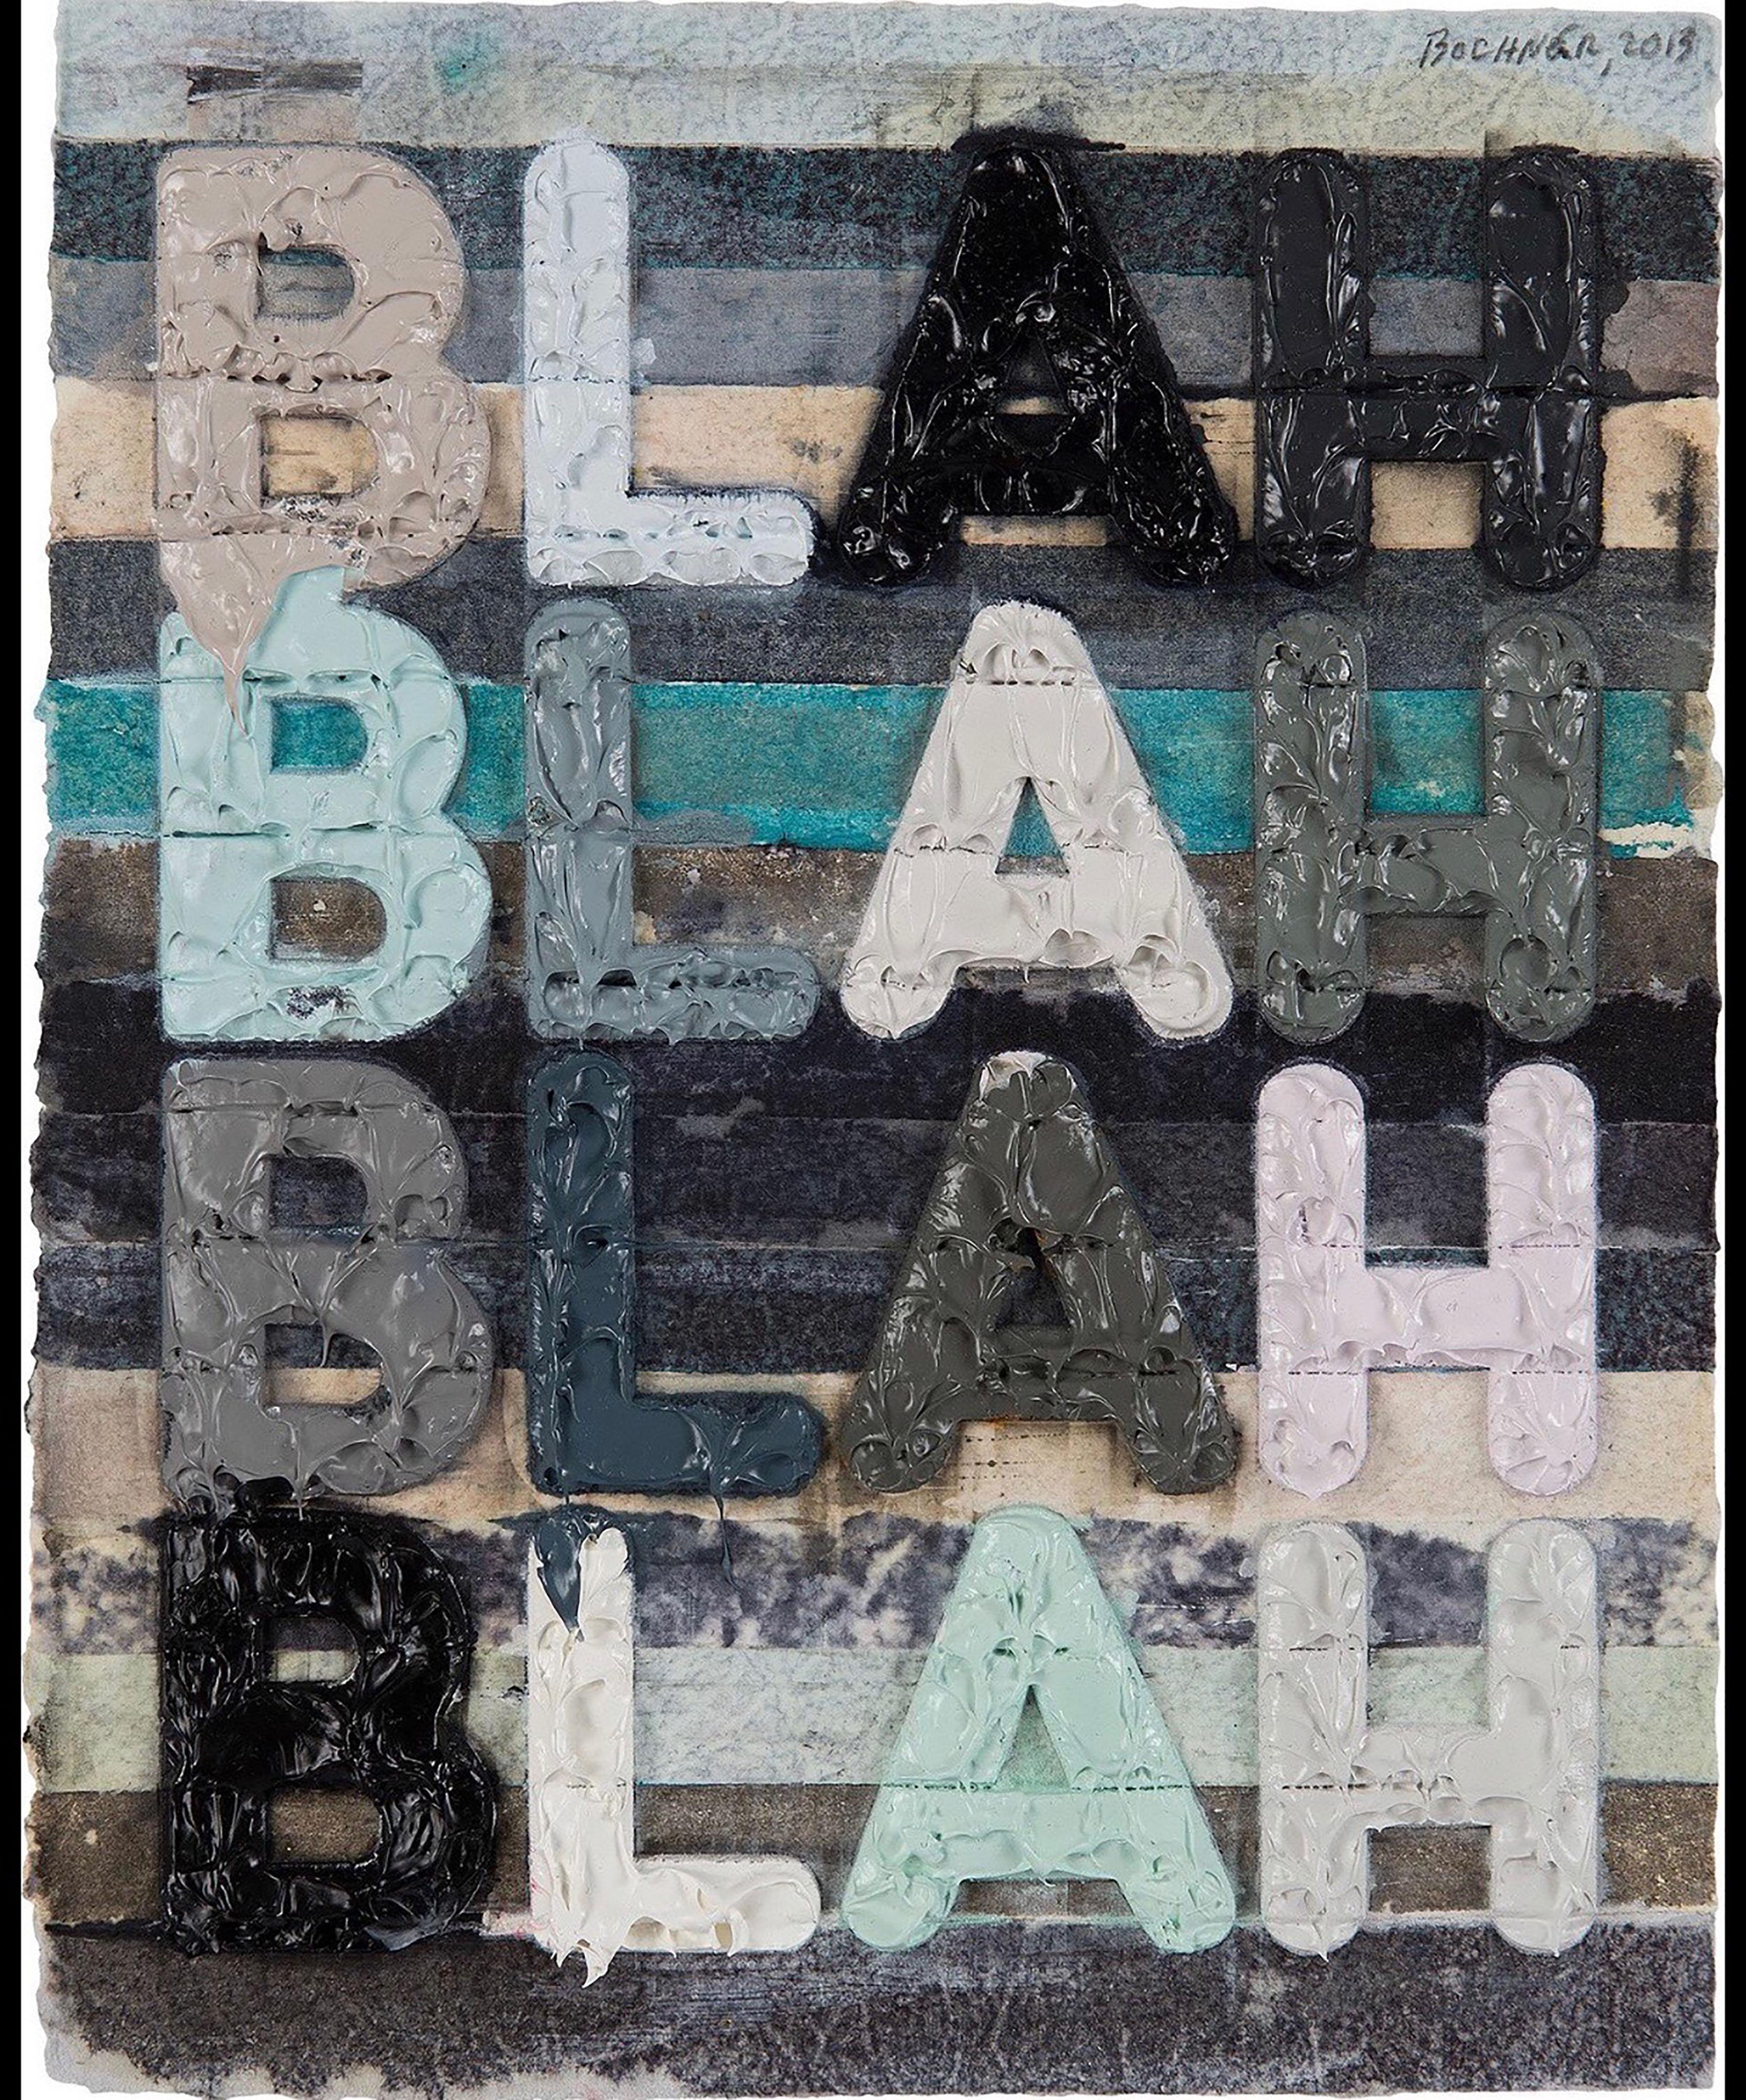 Mel Bochner, 'Blah Blah Blah', 2013
Monoprint with collage, engraving and embossment on hand-dyed Twinrocker paper
11 x 9 ” framed 13 x 10.5 "
Framed with UV Plexi
Signed and dated top right edge in graphite
